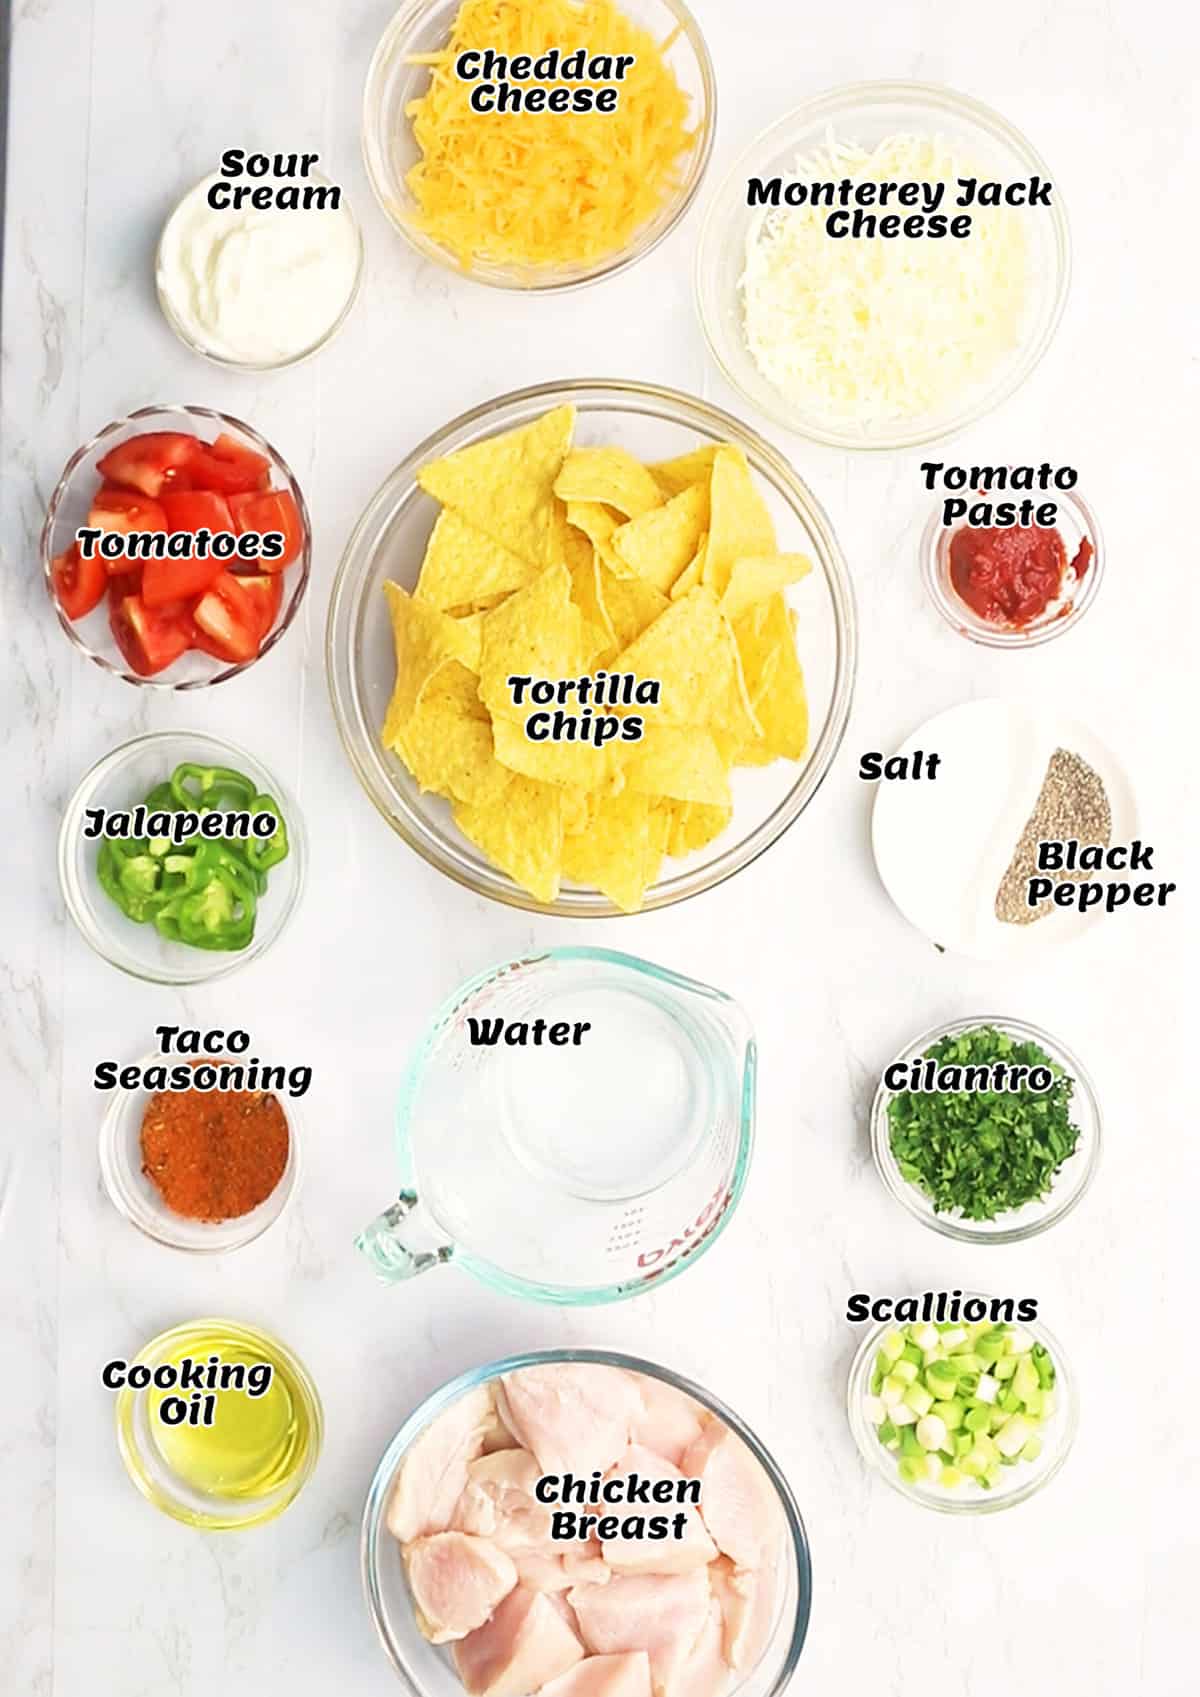 What you need to make this recipe